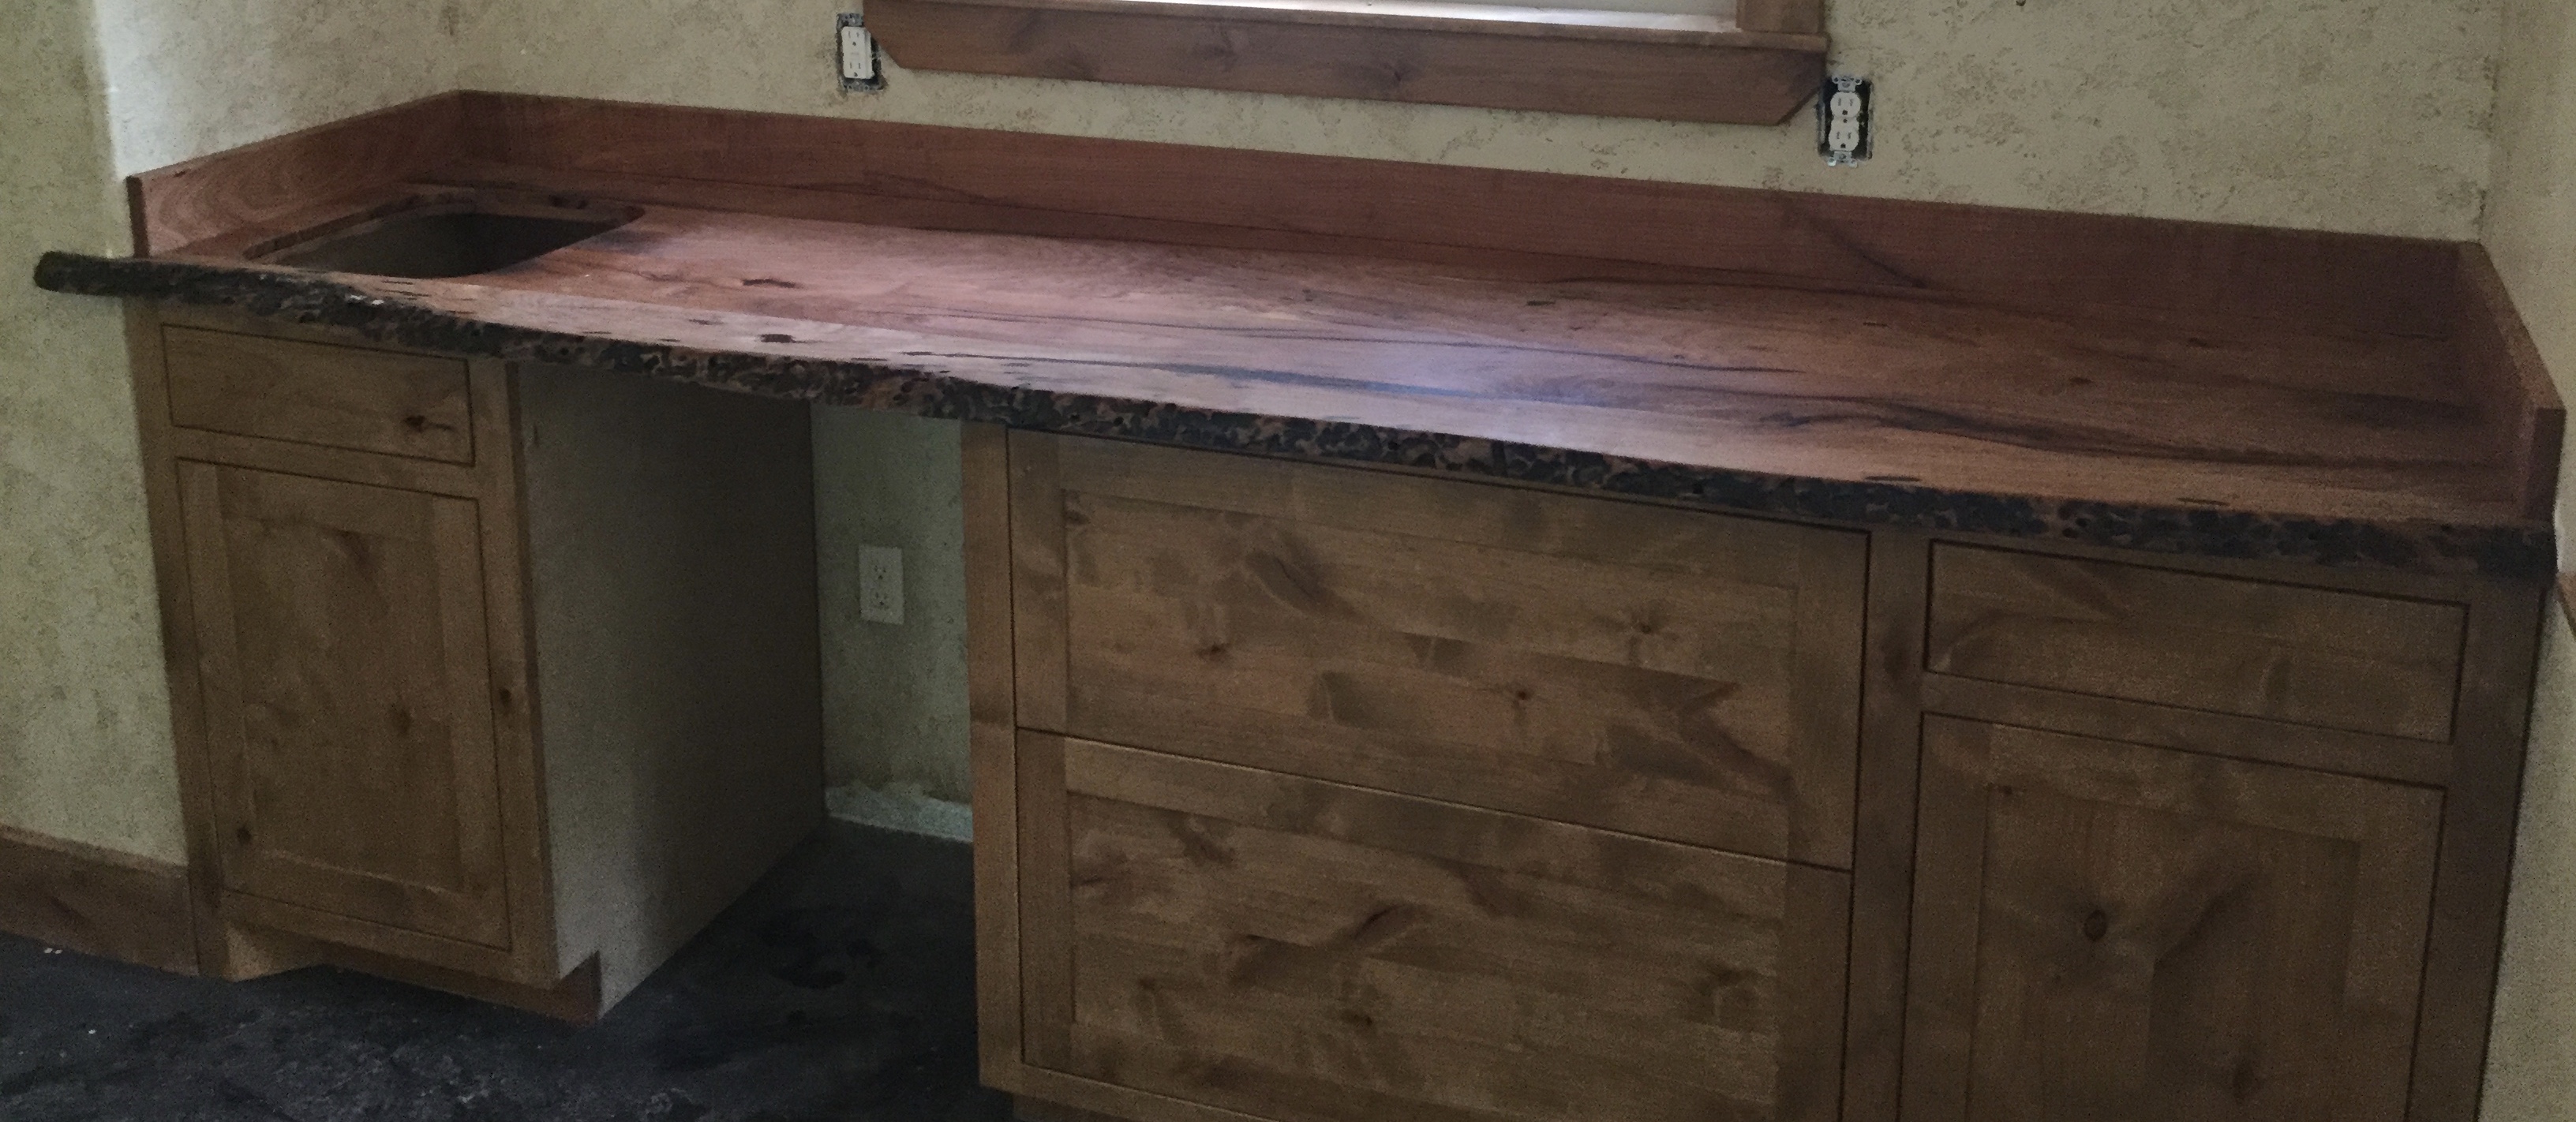 Solid mesquite bar top